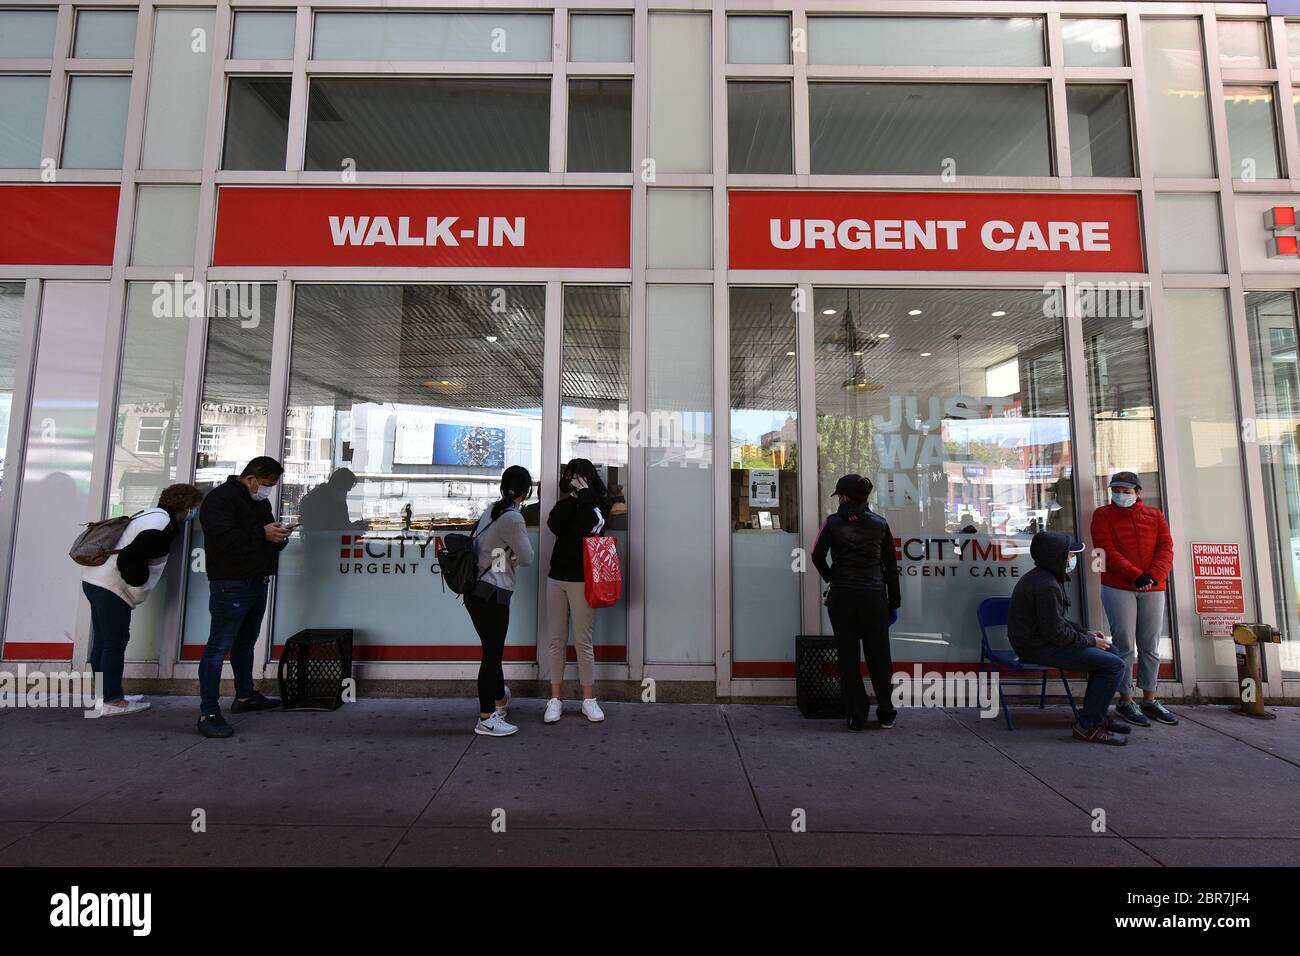 new york city usa 20th may 2020 people stand in line outside the citymd urgent care roosevelt ave walk in site where covid 19 tests are being offered free of charge for those without insurance in the queens neighborhood of new york ny may 20 2020 new york city mayor bill de blasio said citymd and new york city have partnered to try and get as many as 6000 nasopharyngeal swabs a day credit sipa usaalamy live news 2BR7JF4